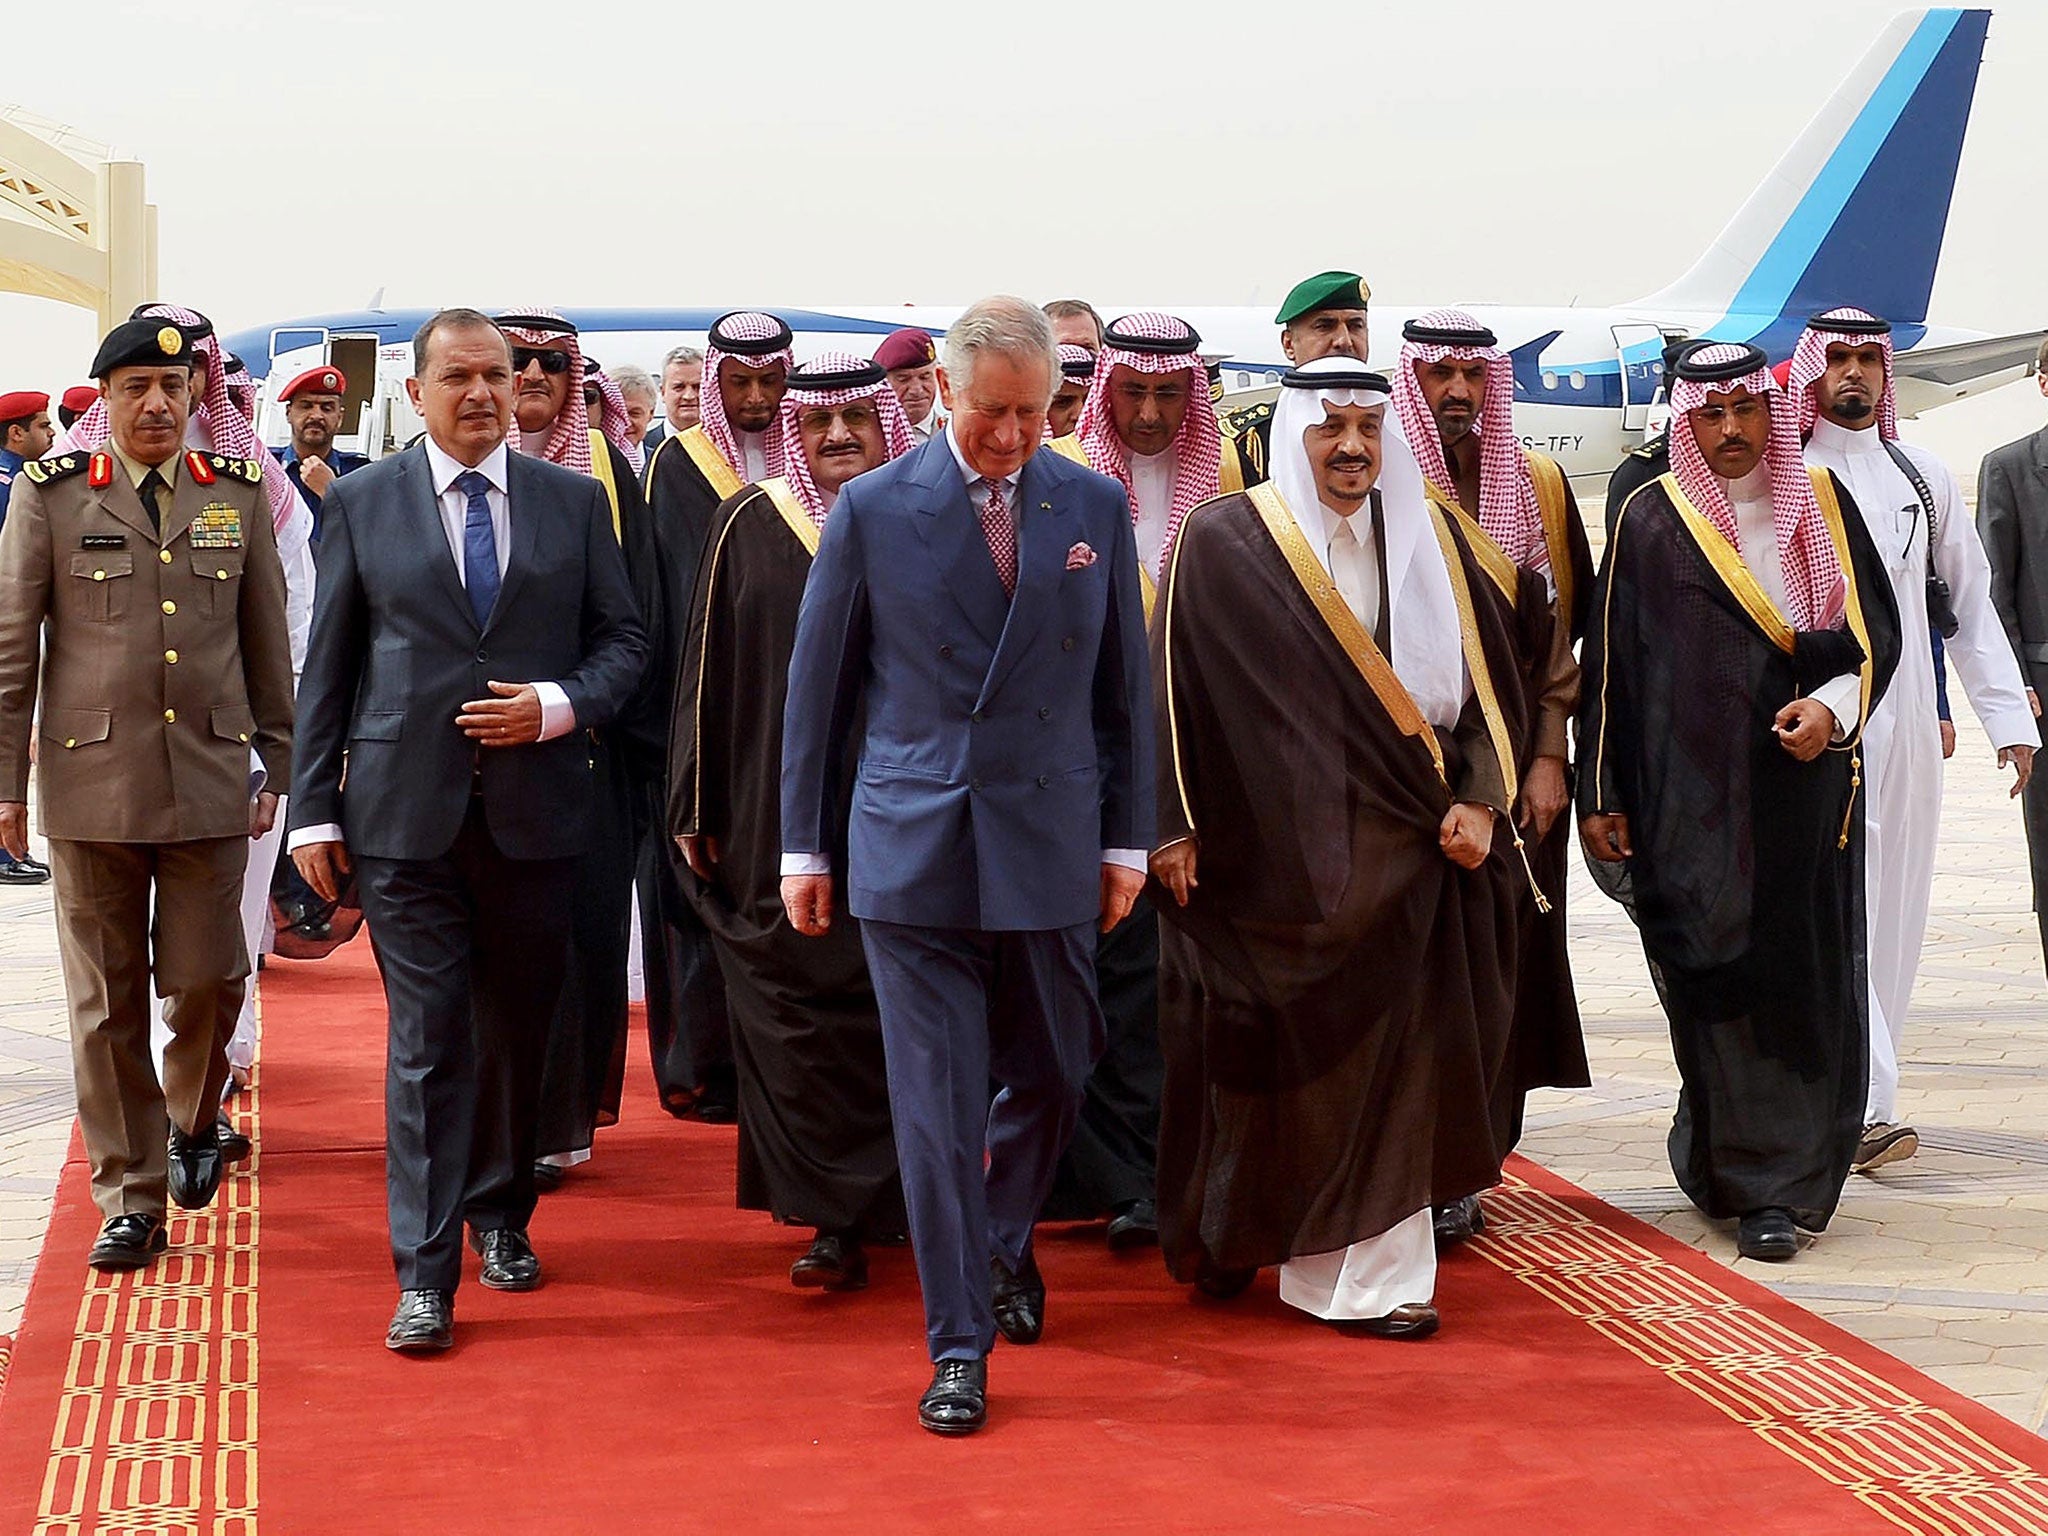 Prince Charles (center - L) being welcomed by the Governor of Riyadh Province, Turki bin Abdullah al-Saud (center - R), upon his arrival at the airport in Riyadh, Saudi Arabia